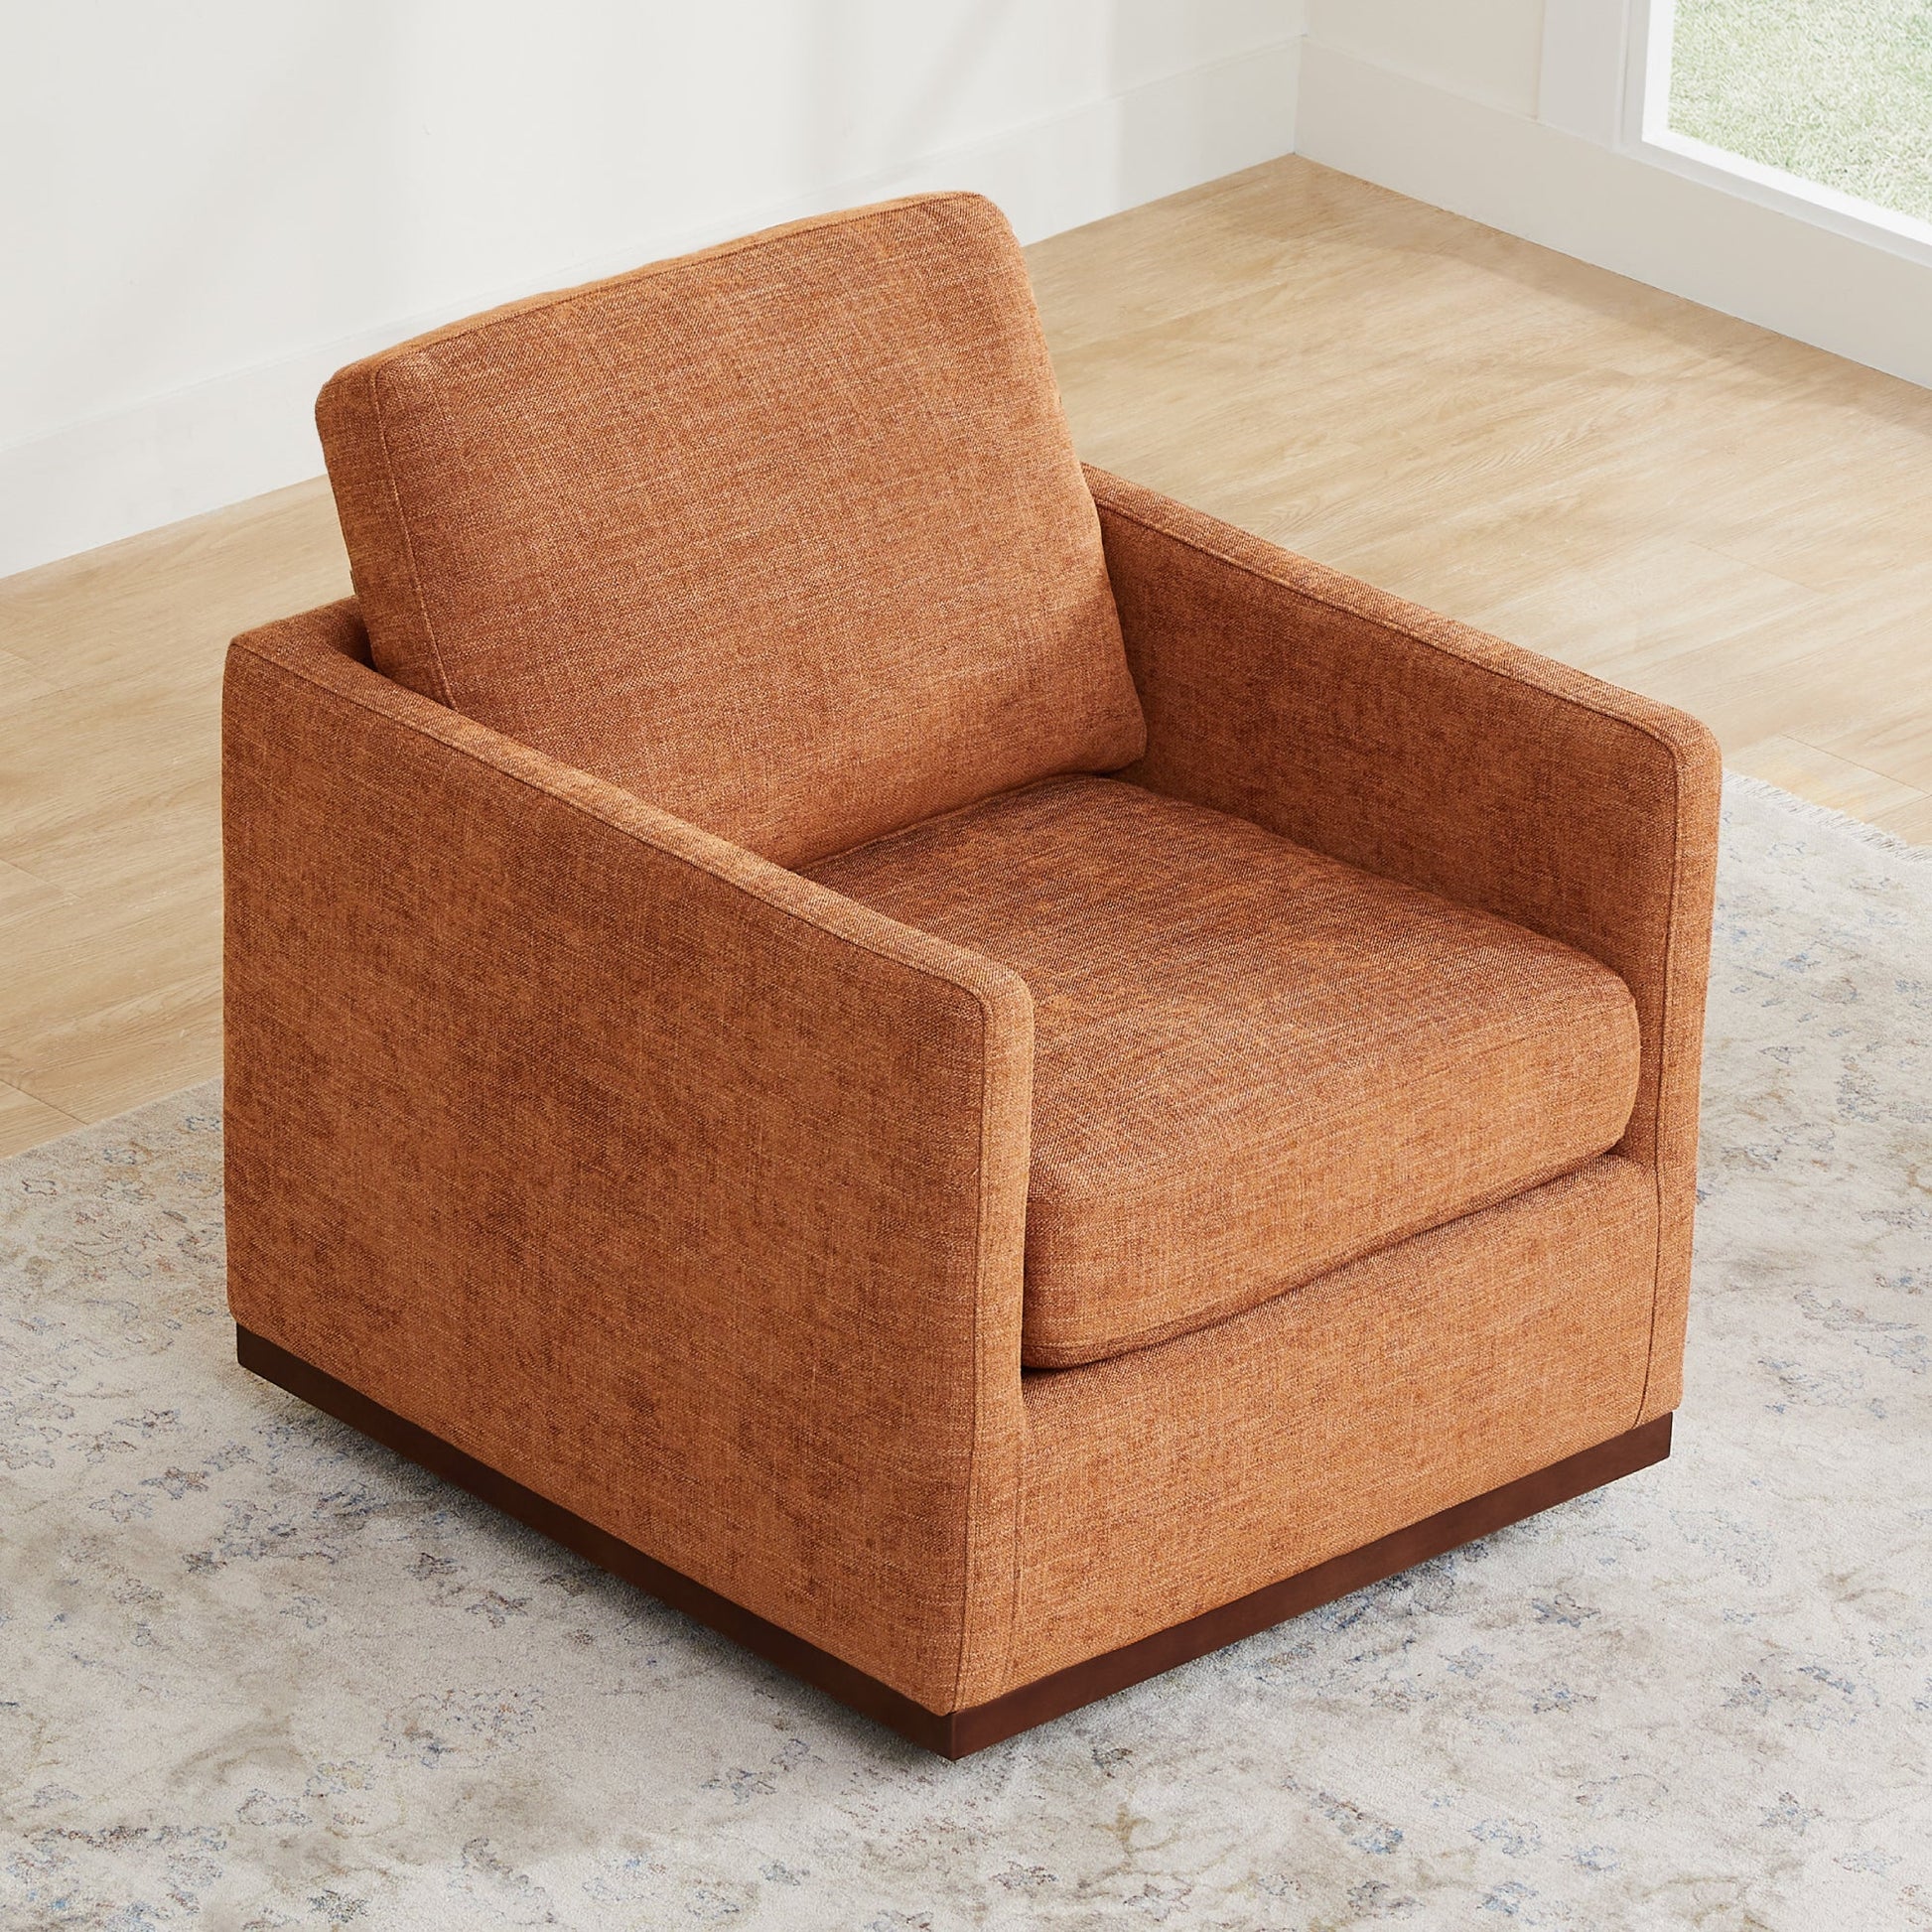 CHITA LIVING-Henry Swivel Accent Chair-Accent Chair-Fabric-Terracotta-